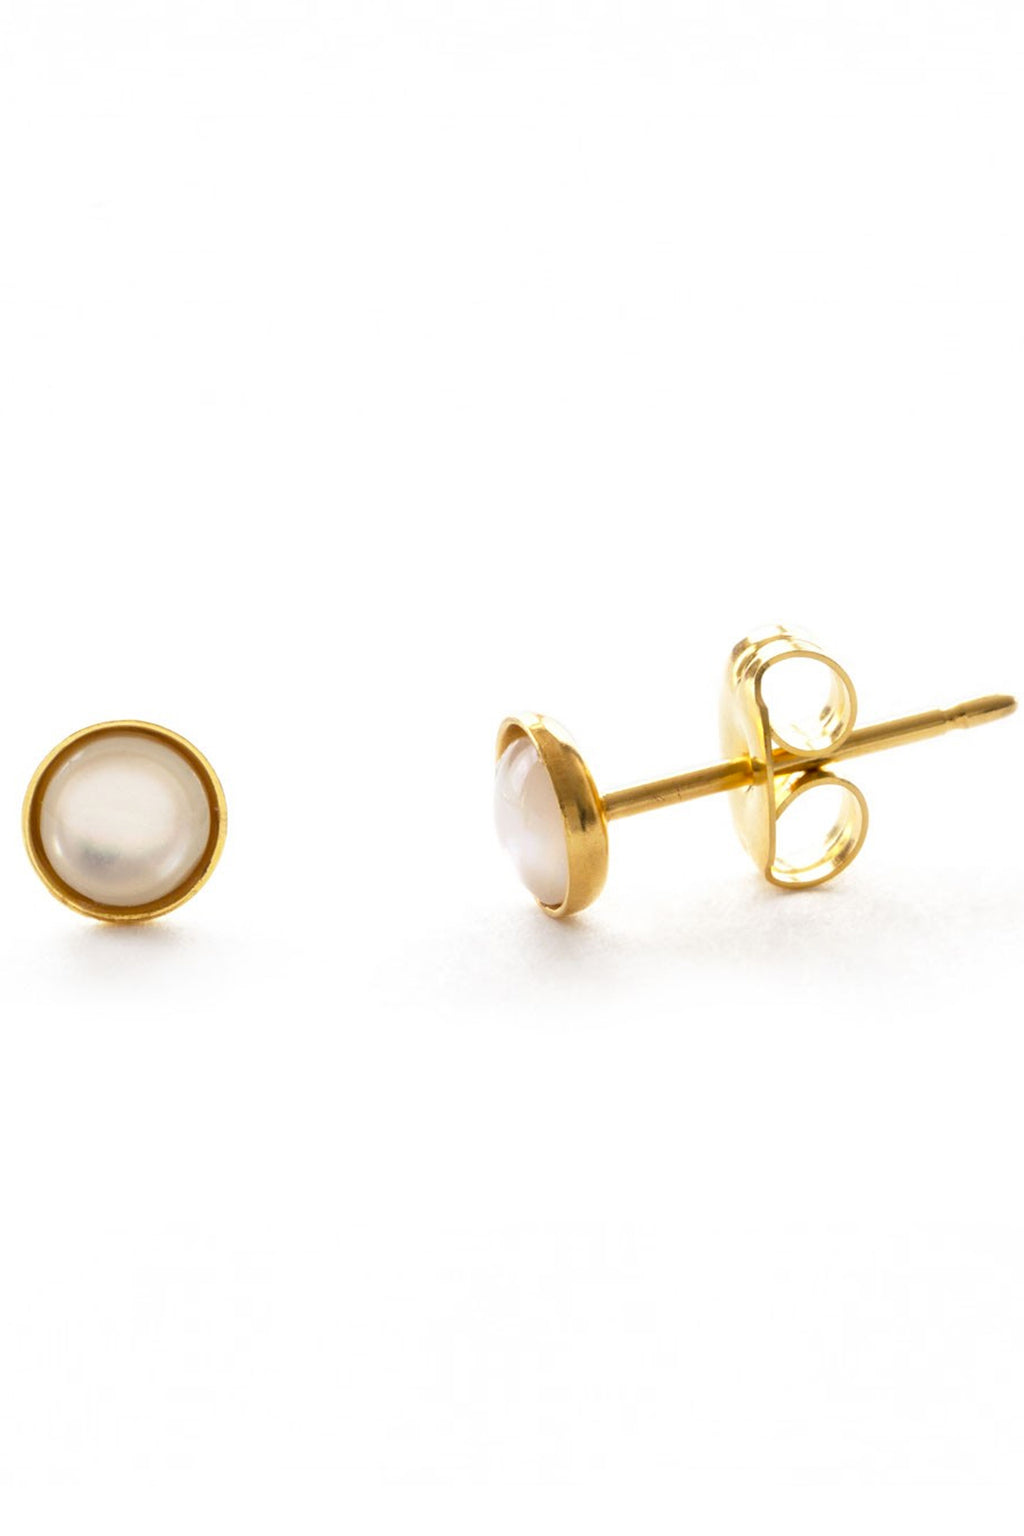 Amano Mother Of Pearl Studs - The Mercantile London